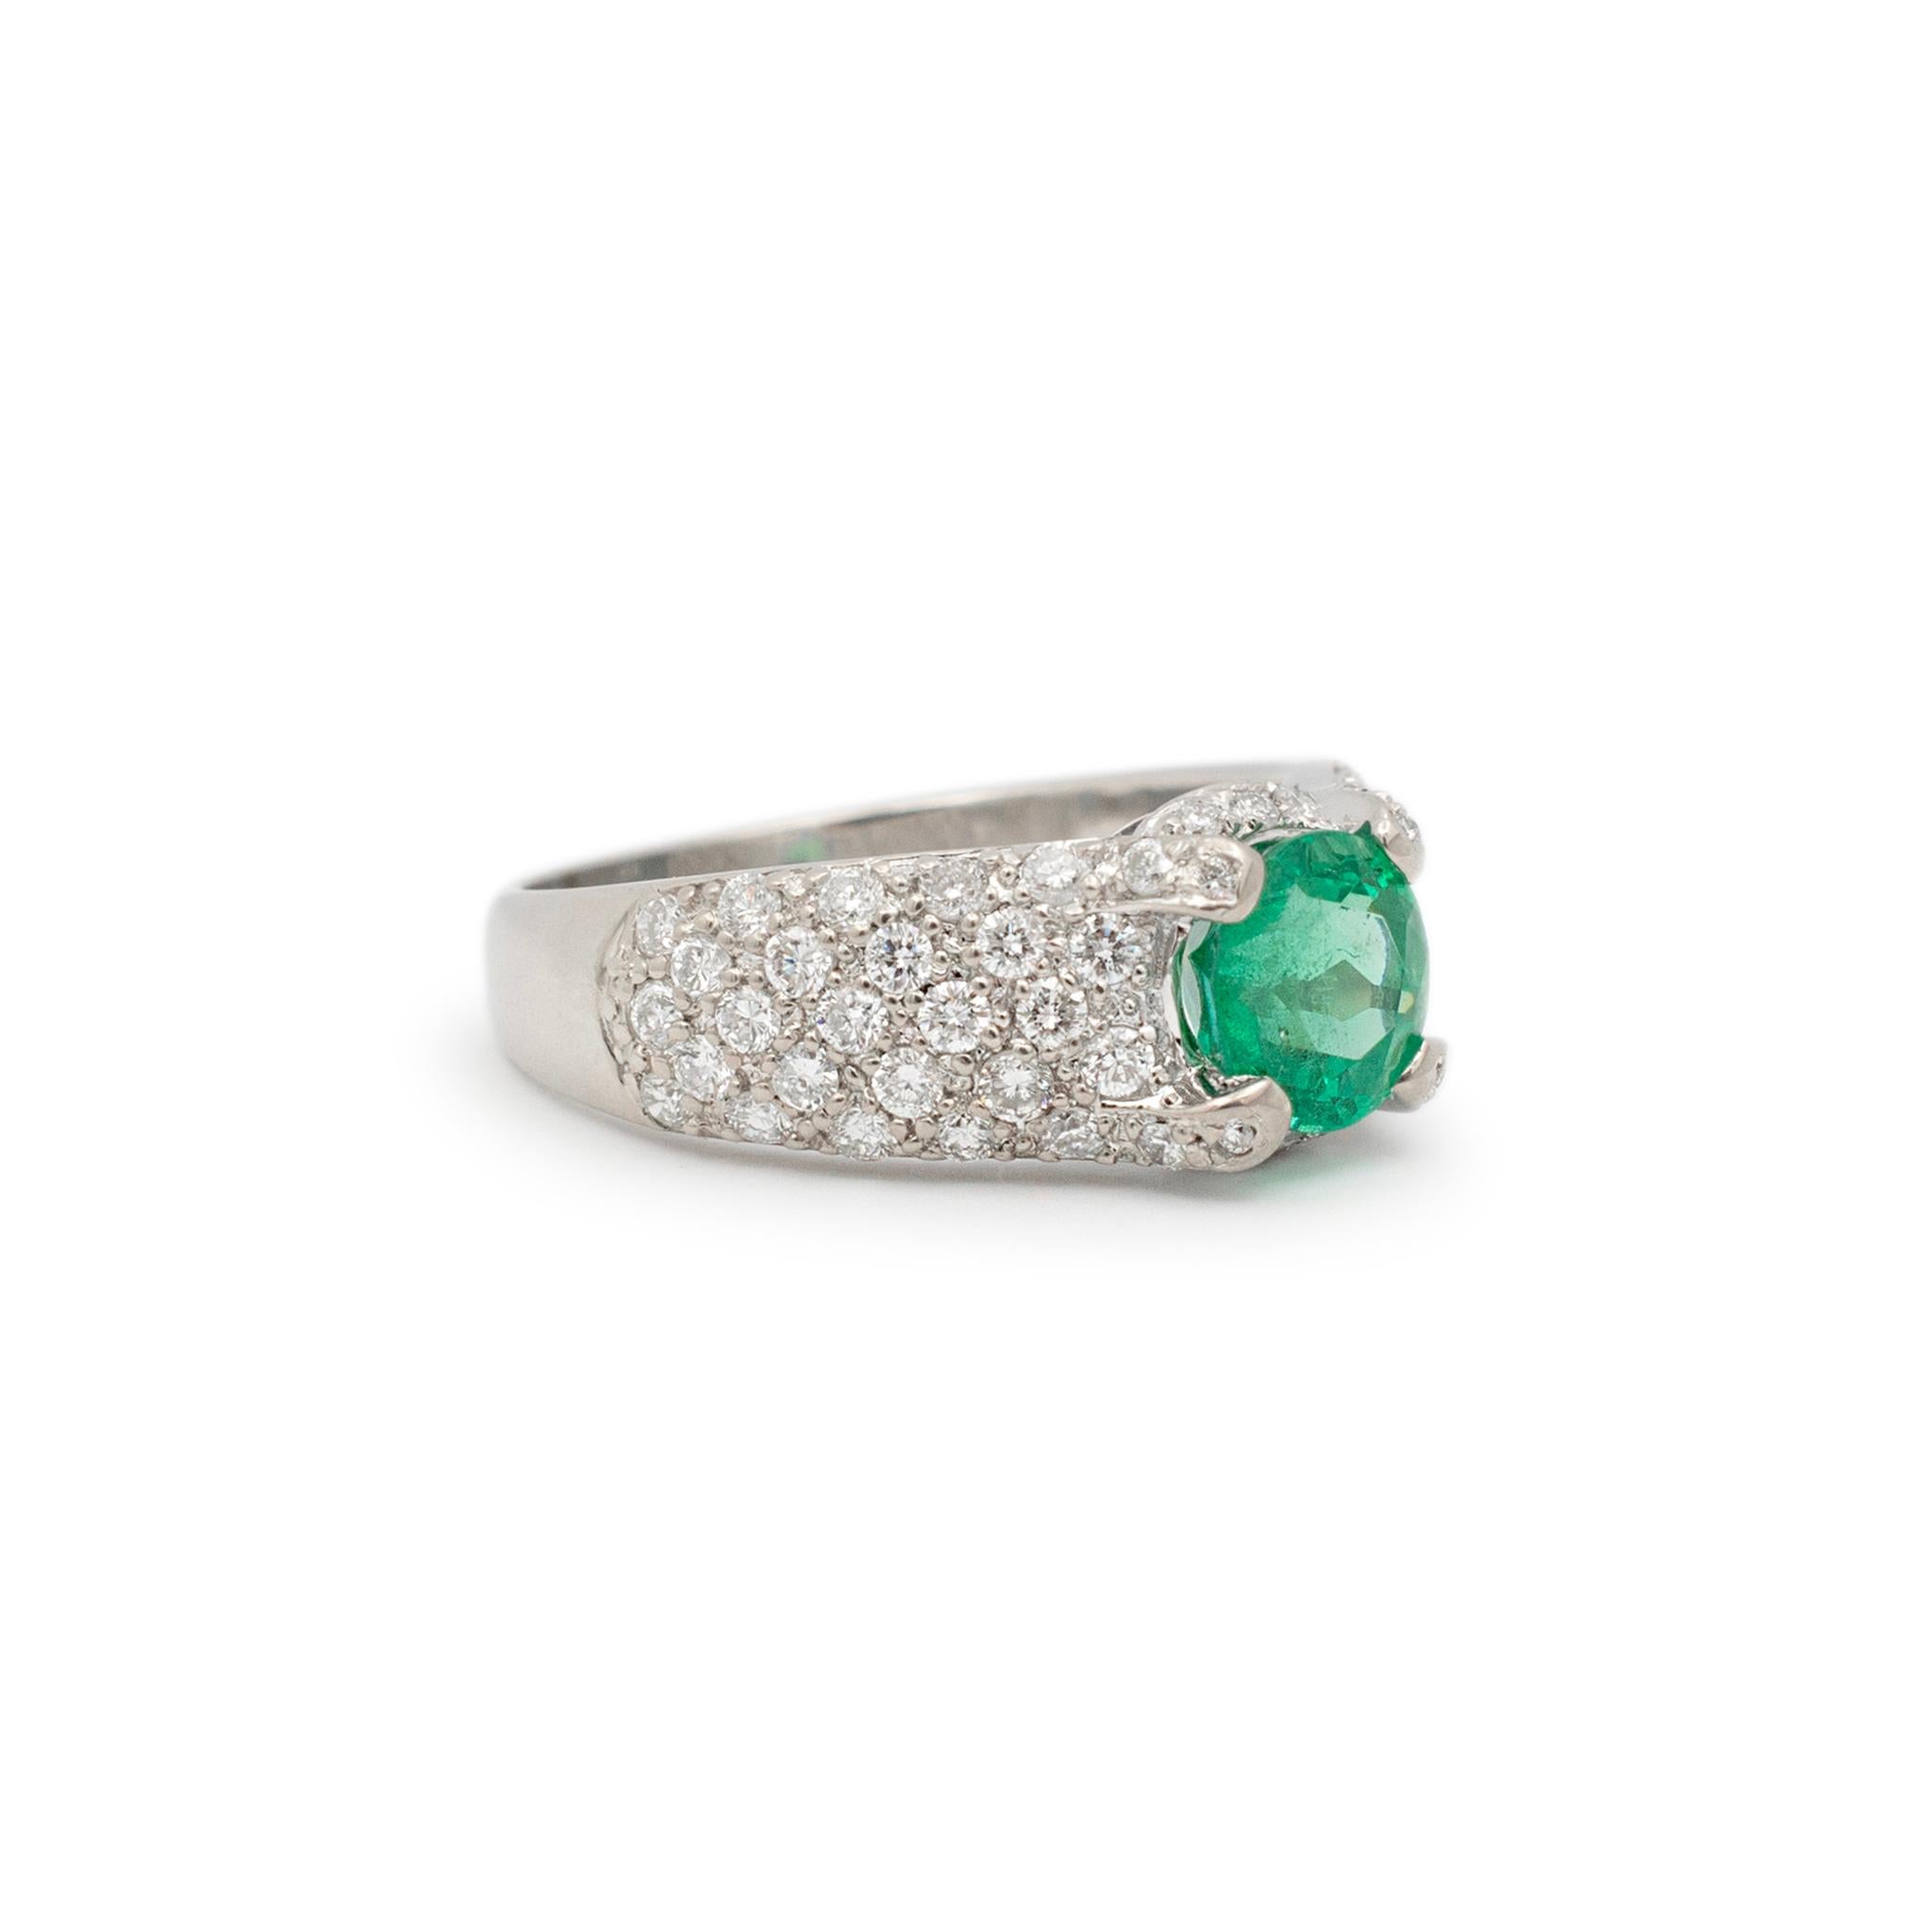 Ladies 18K White Gold 1.28CT. Emerald Pave Diamond Cocktail Ring In Excellent Condition For Sale In Houston, TX